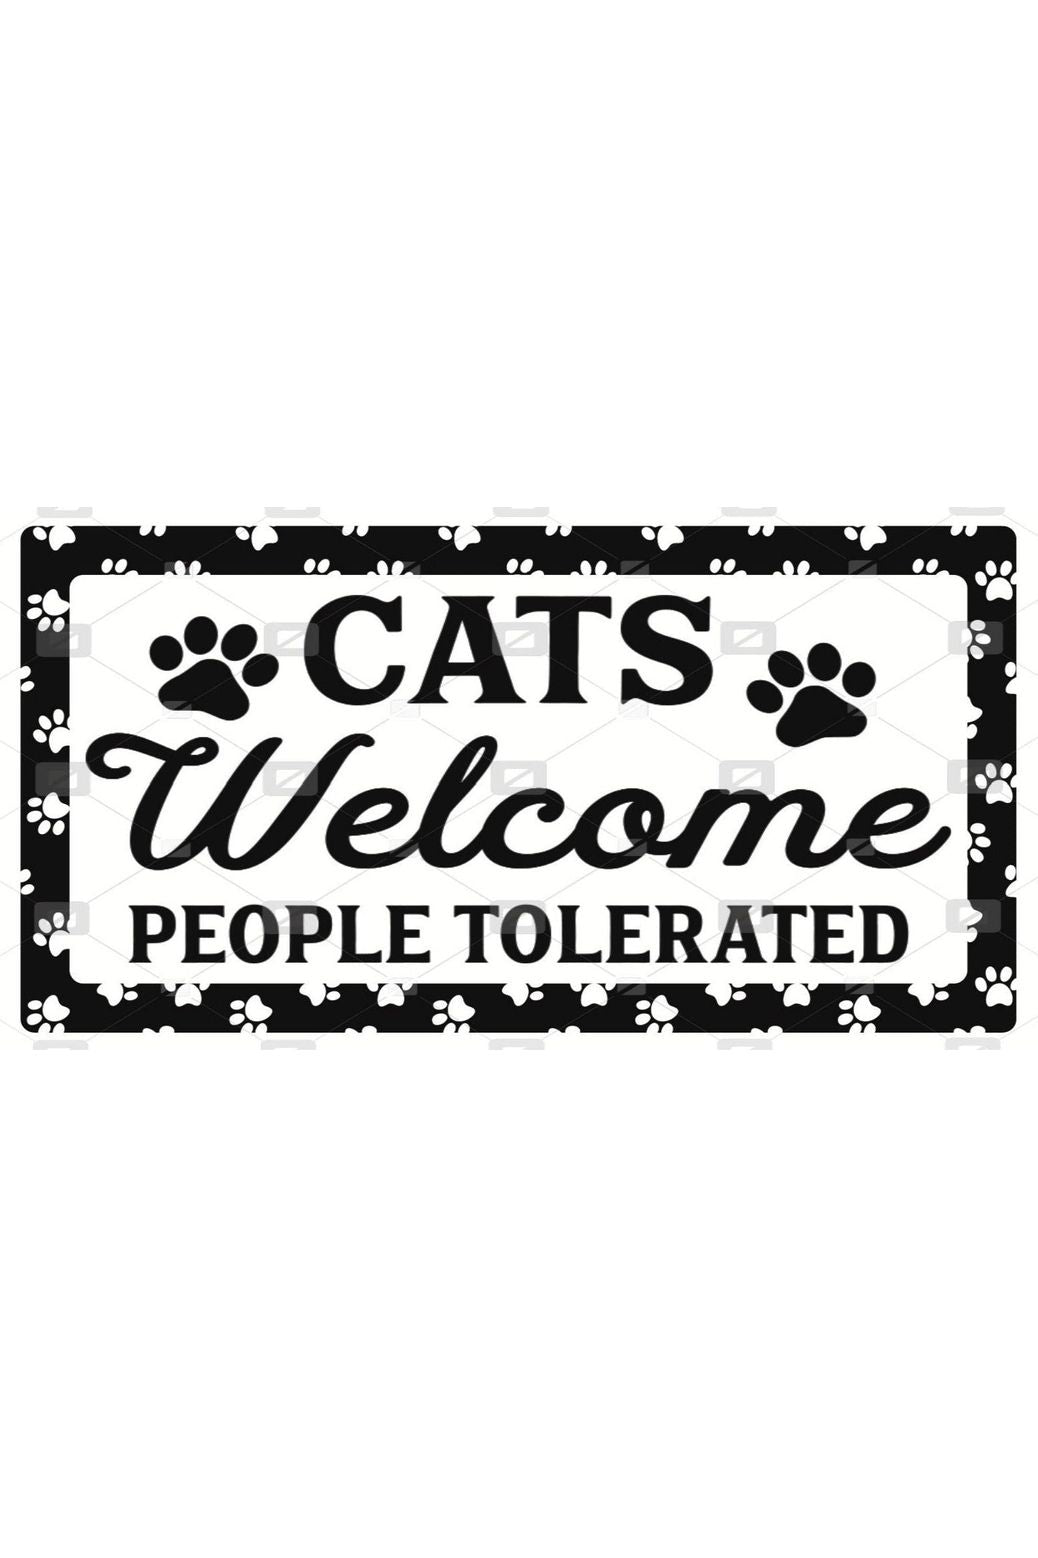 Shop For Cats Welcome People Tolerated Sign - Wreath Enhancement